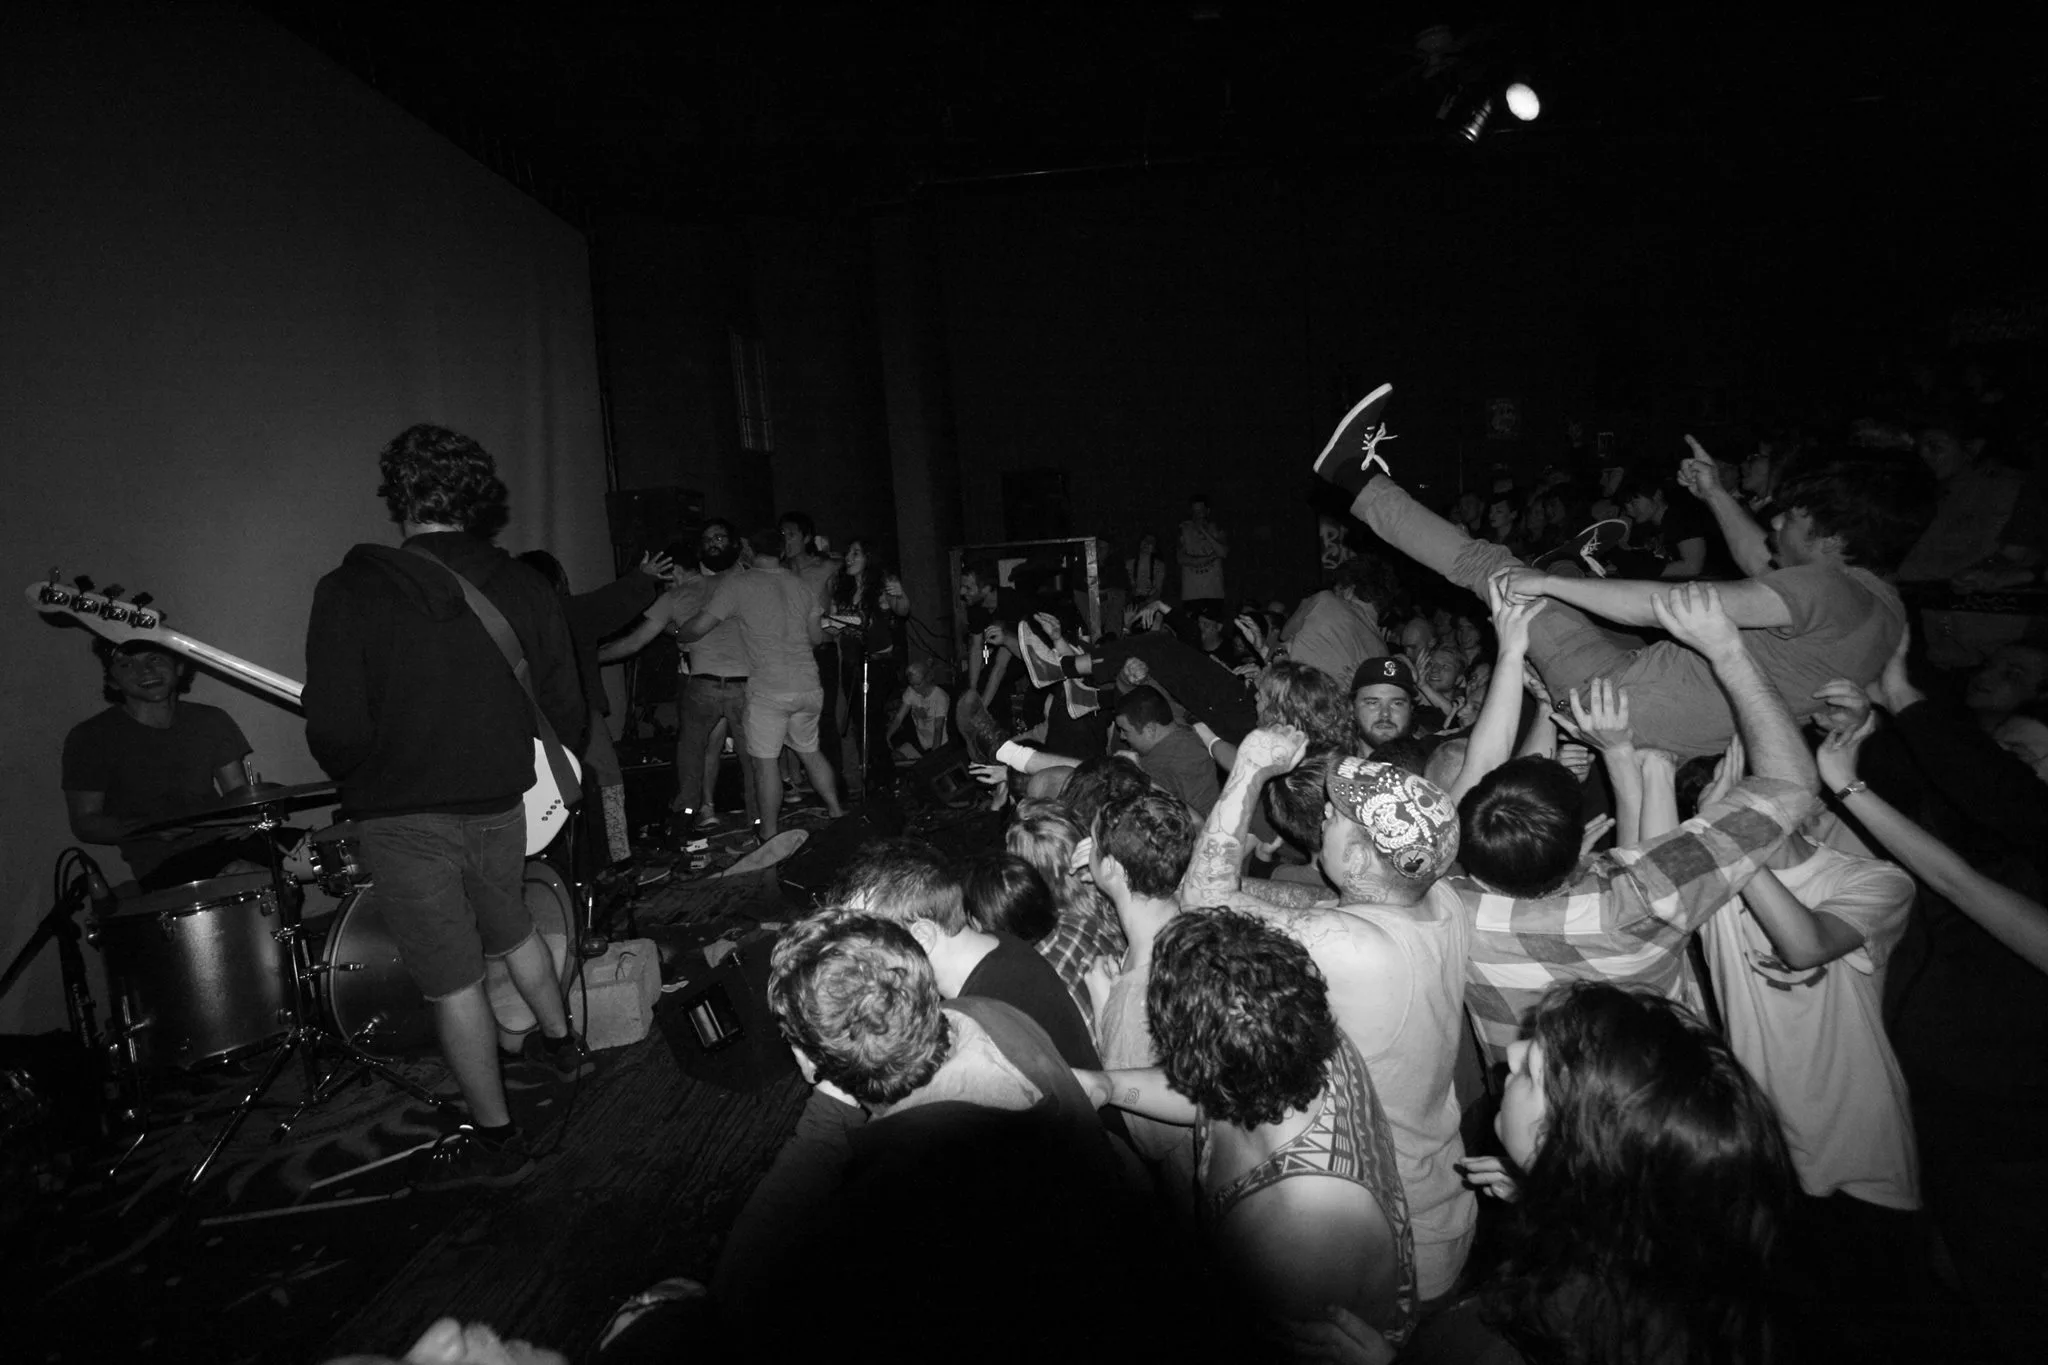 A black and white photo of someone crowd surfing during a metal performance